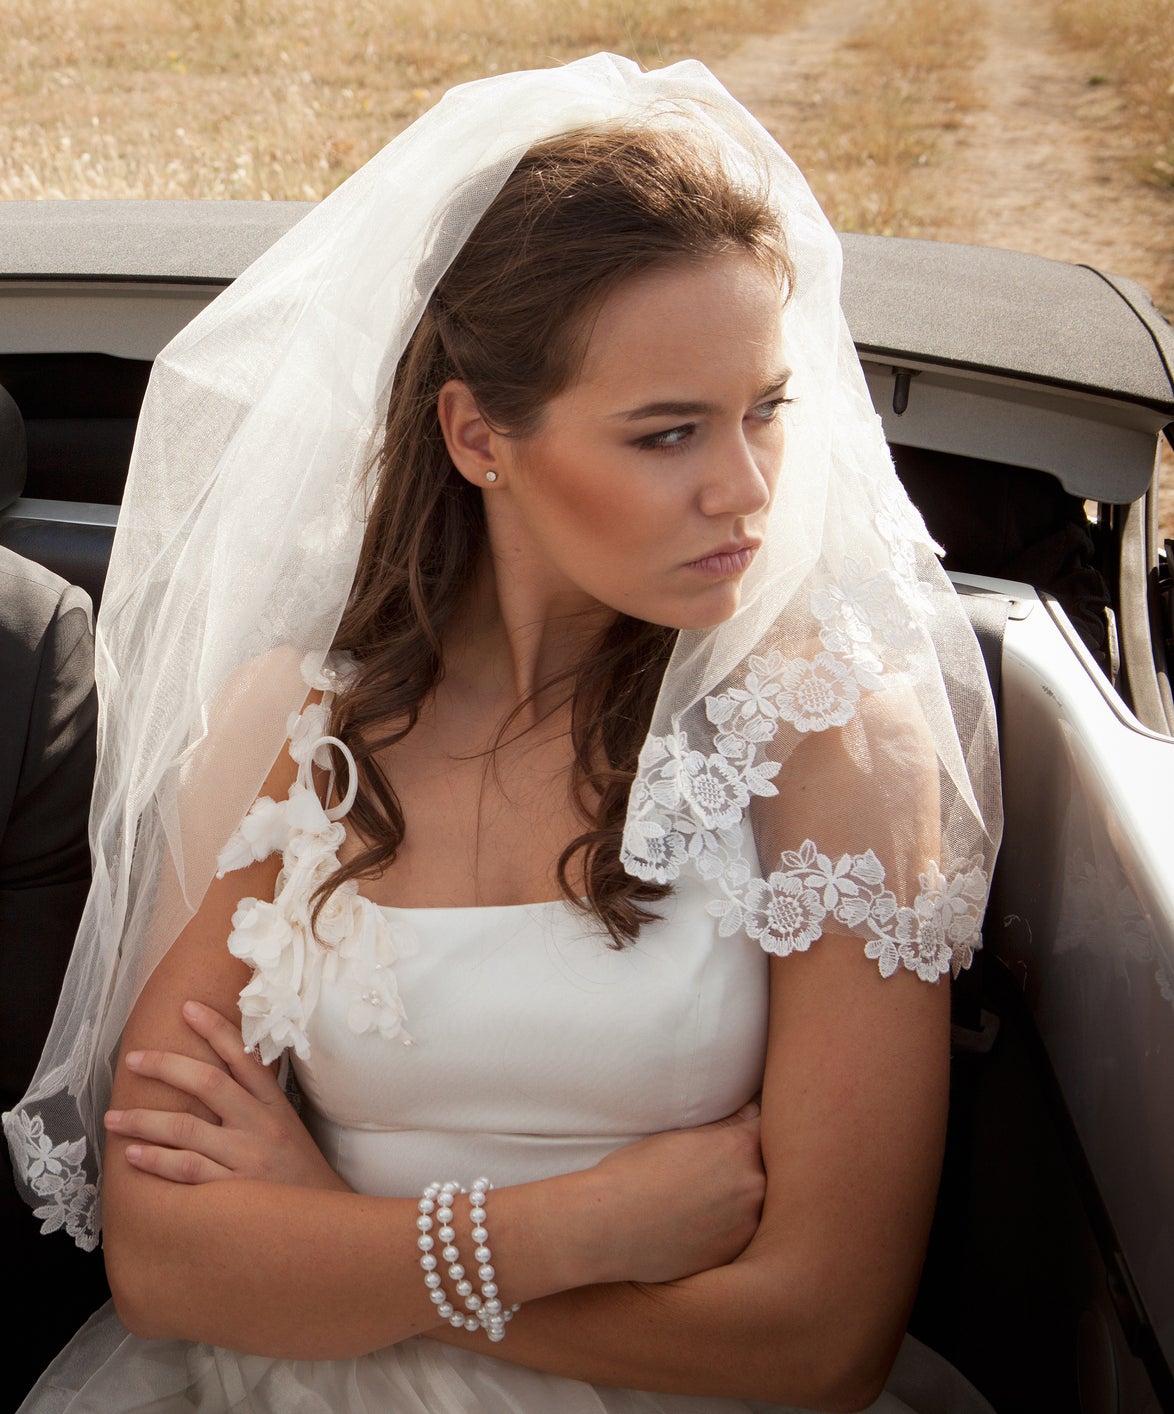 Bride and groom appear discontent in a car, groom on phone, bride looking away